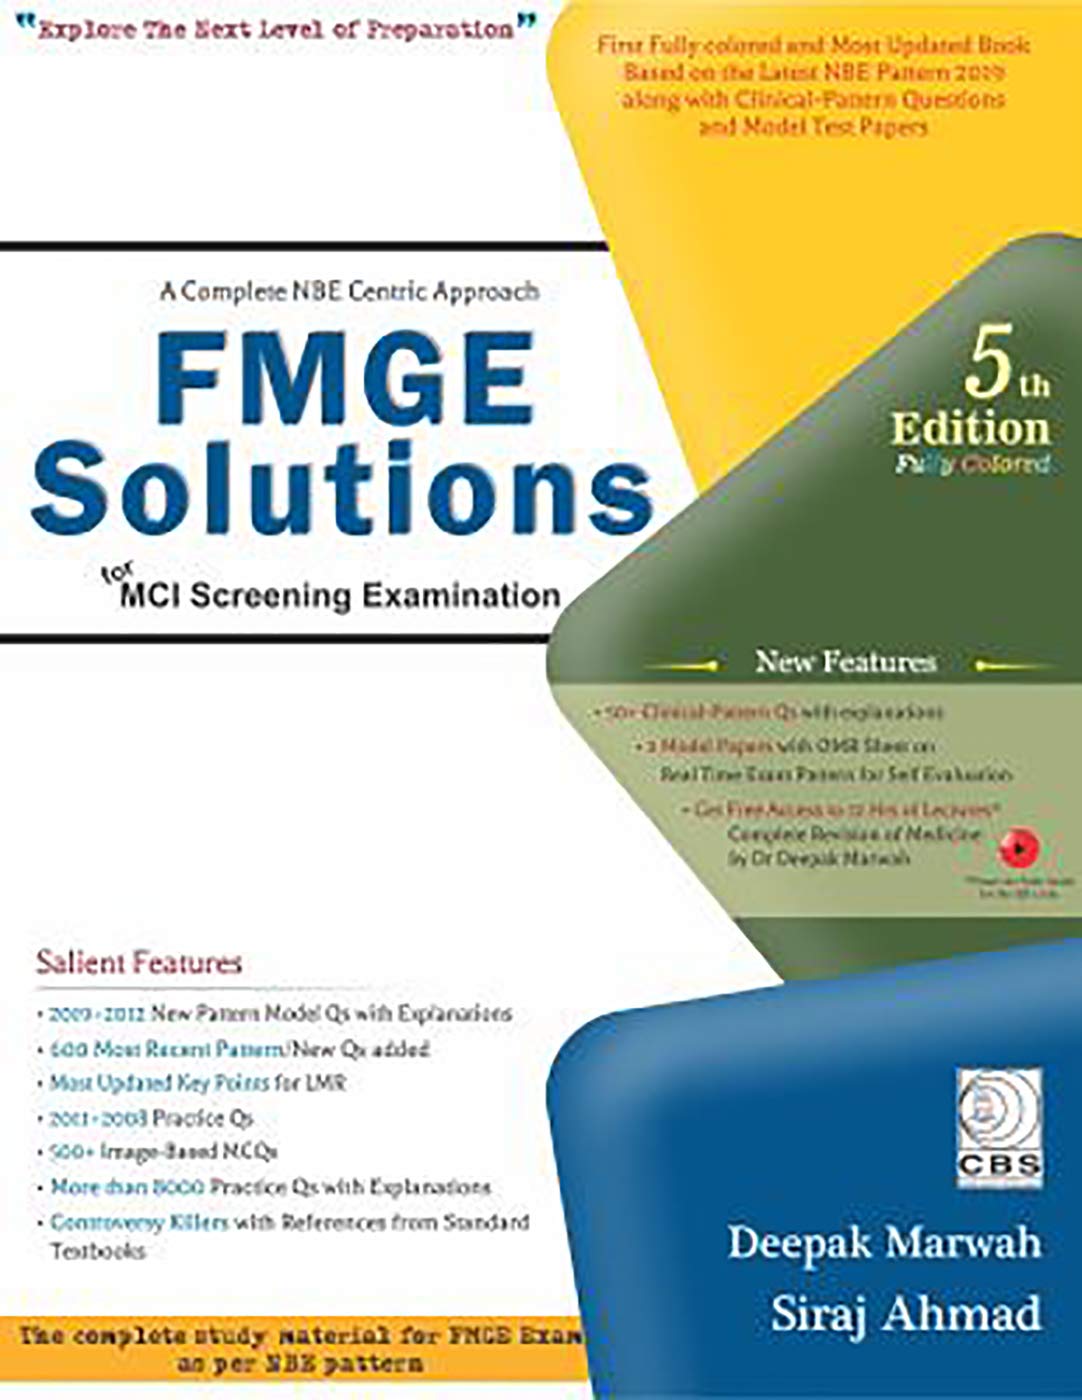 A Complete Nbe Centric Approach Fmge Solutions For Mci Screening Examination, 5E Fully Colored (Hb)